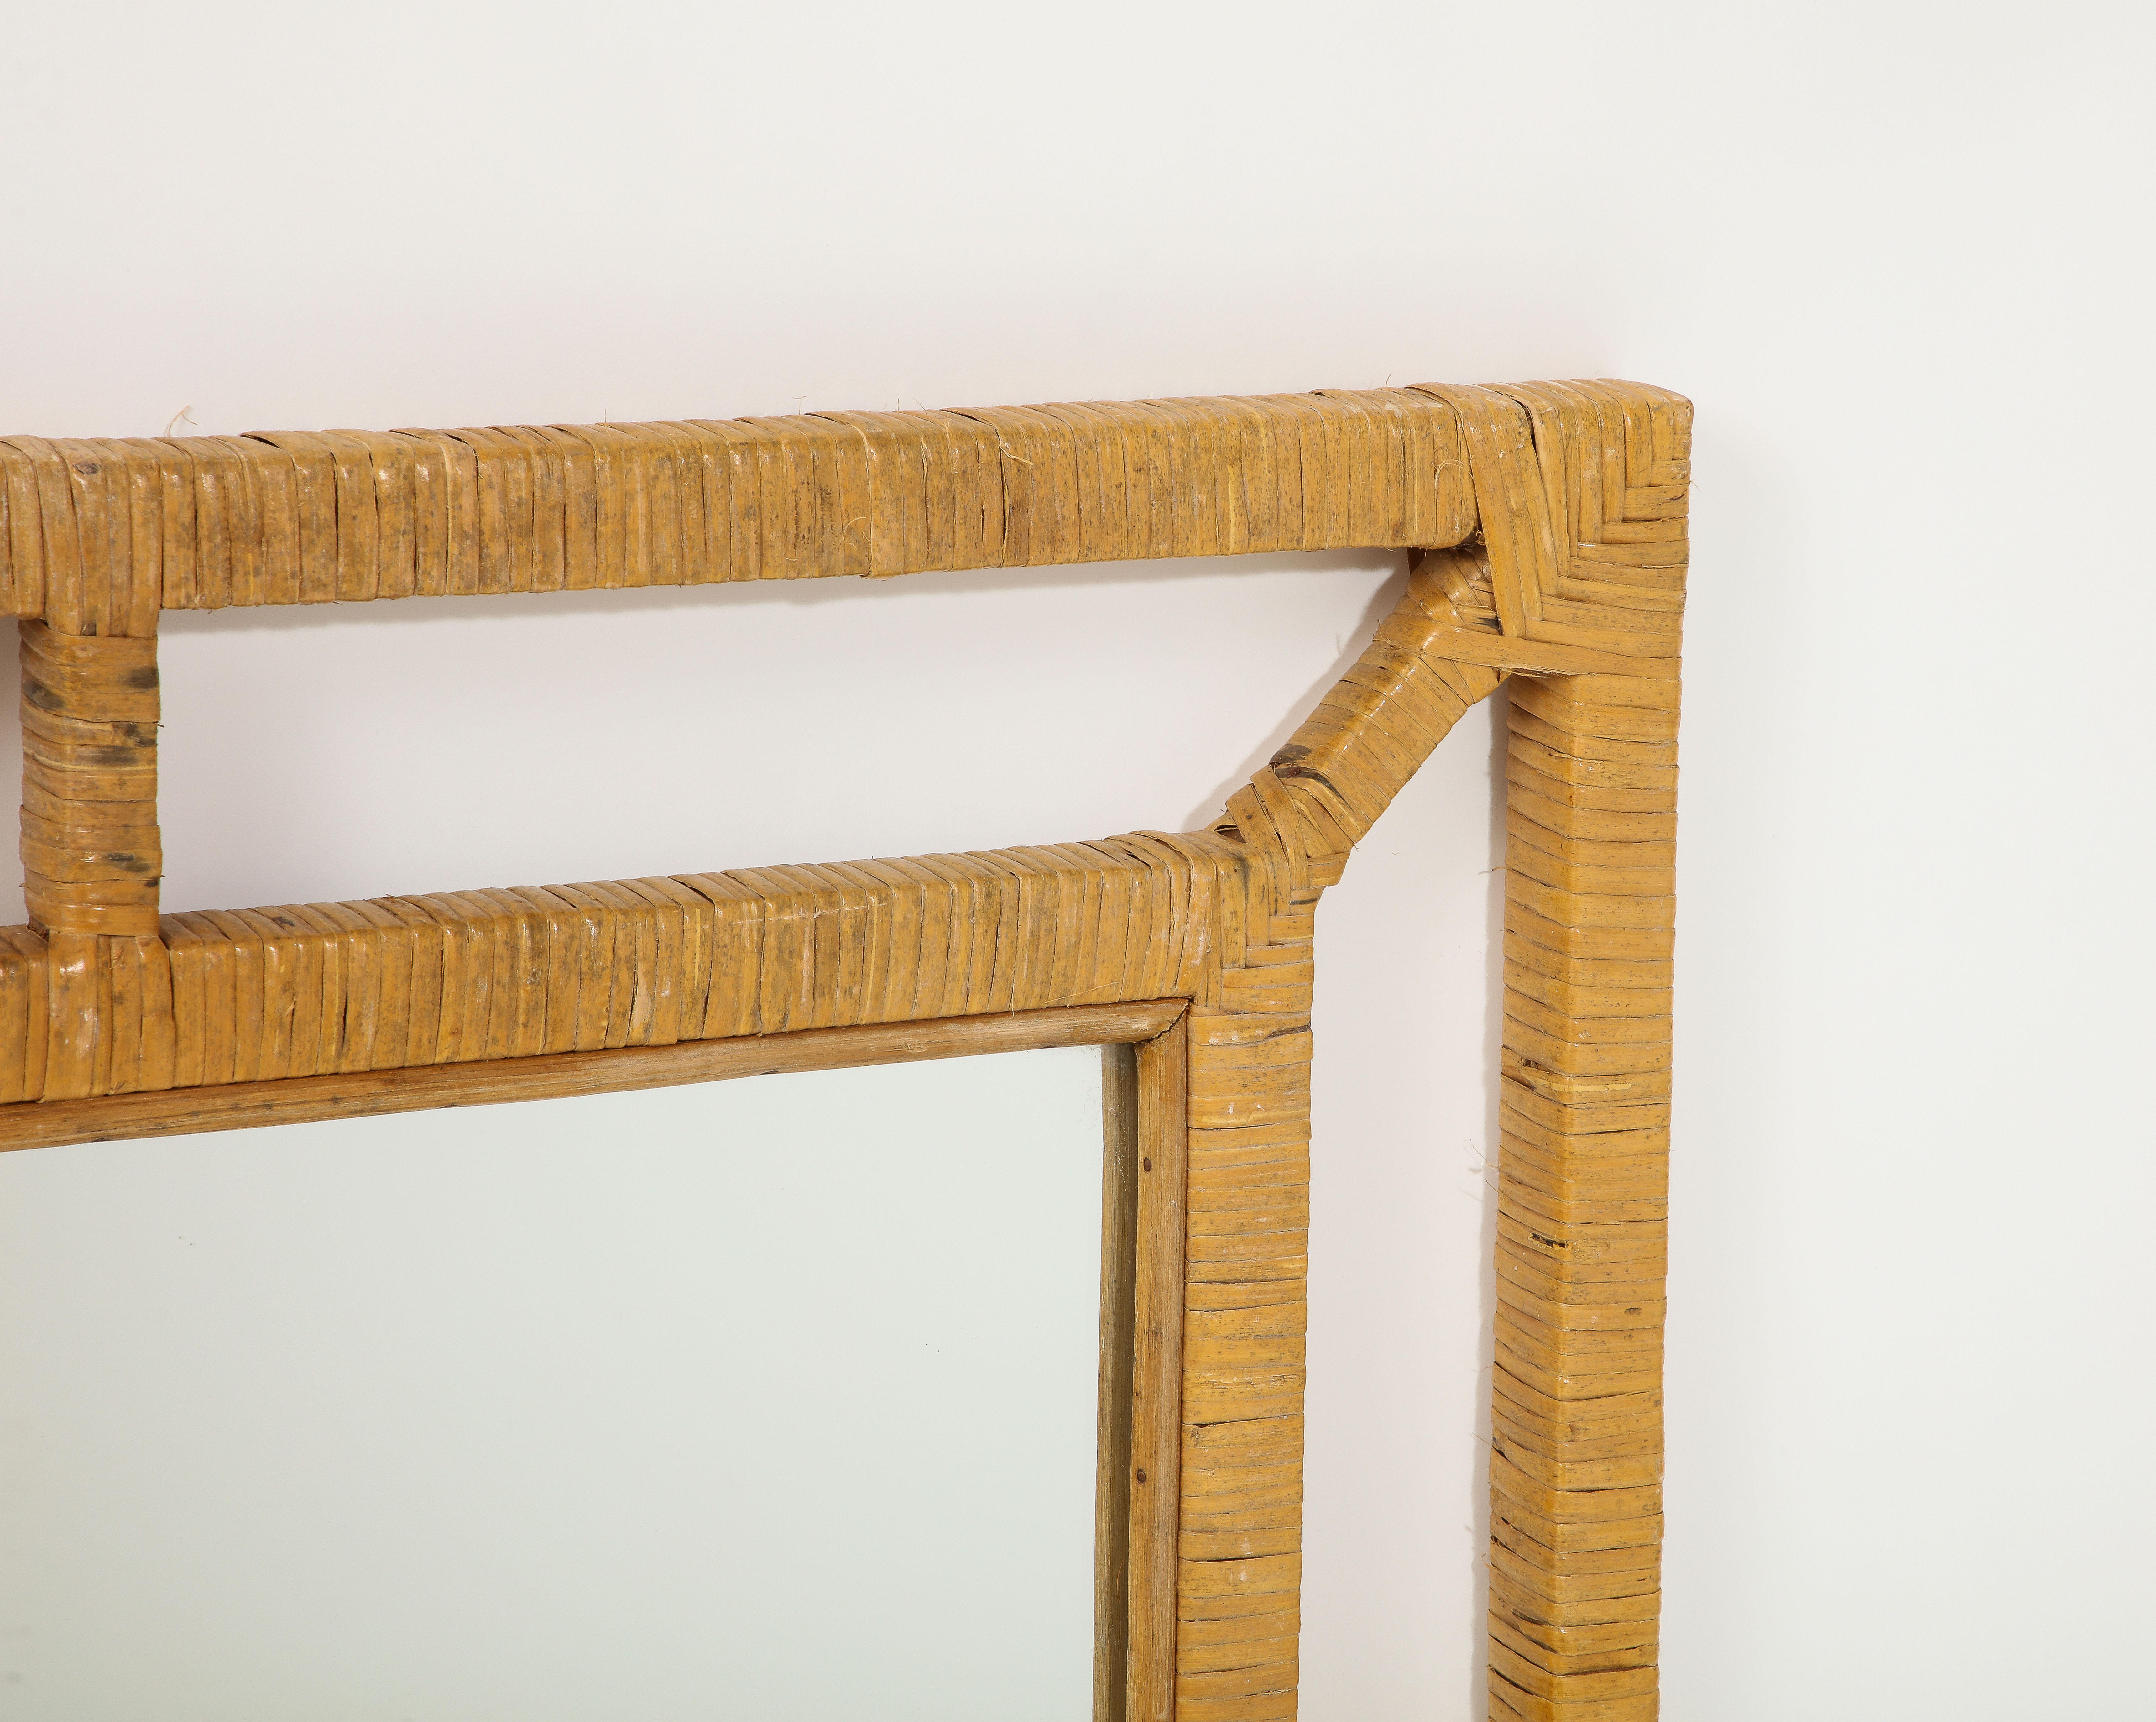 Large Wicker and Wood Mirror, France 1960's For Sale 2